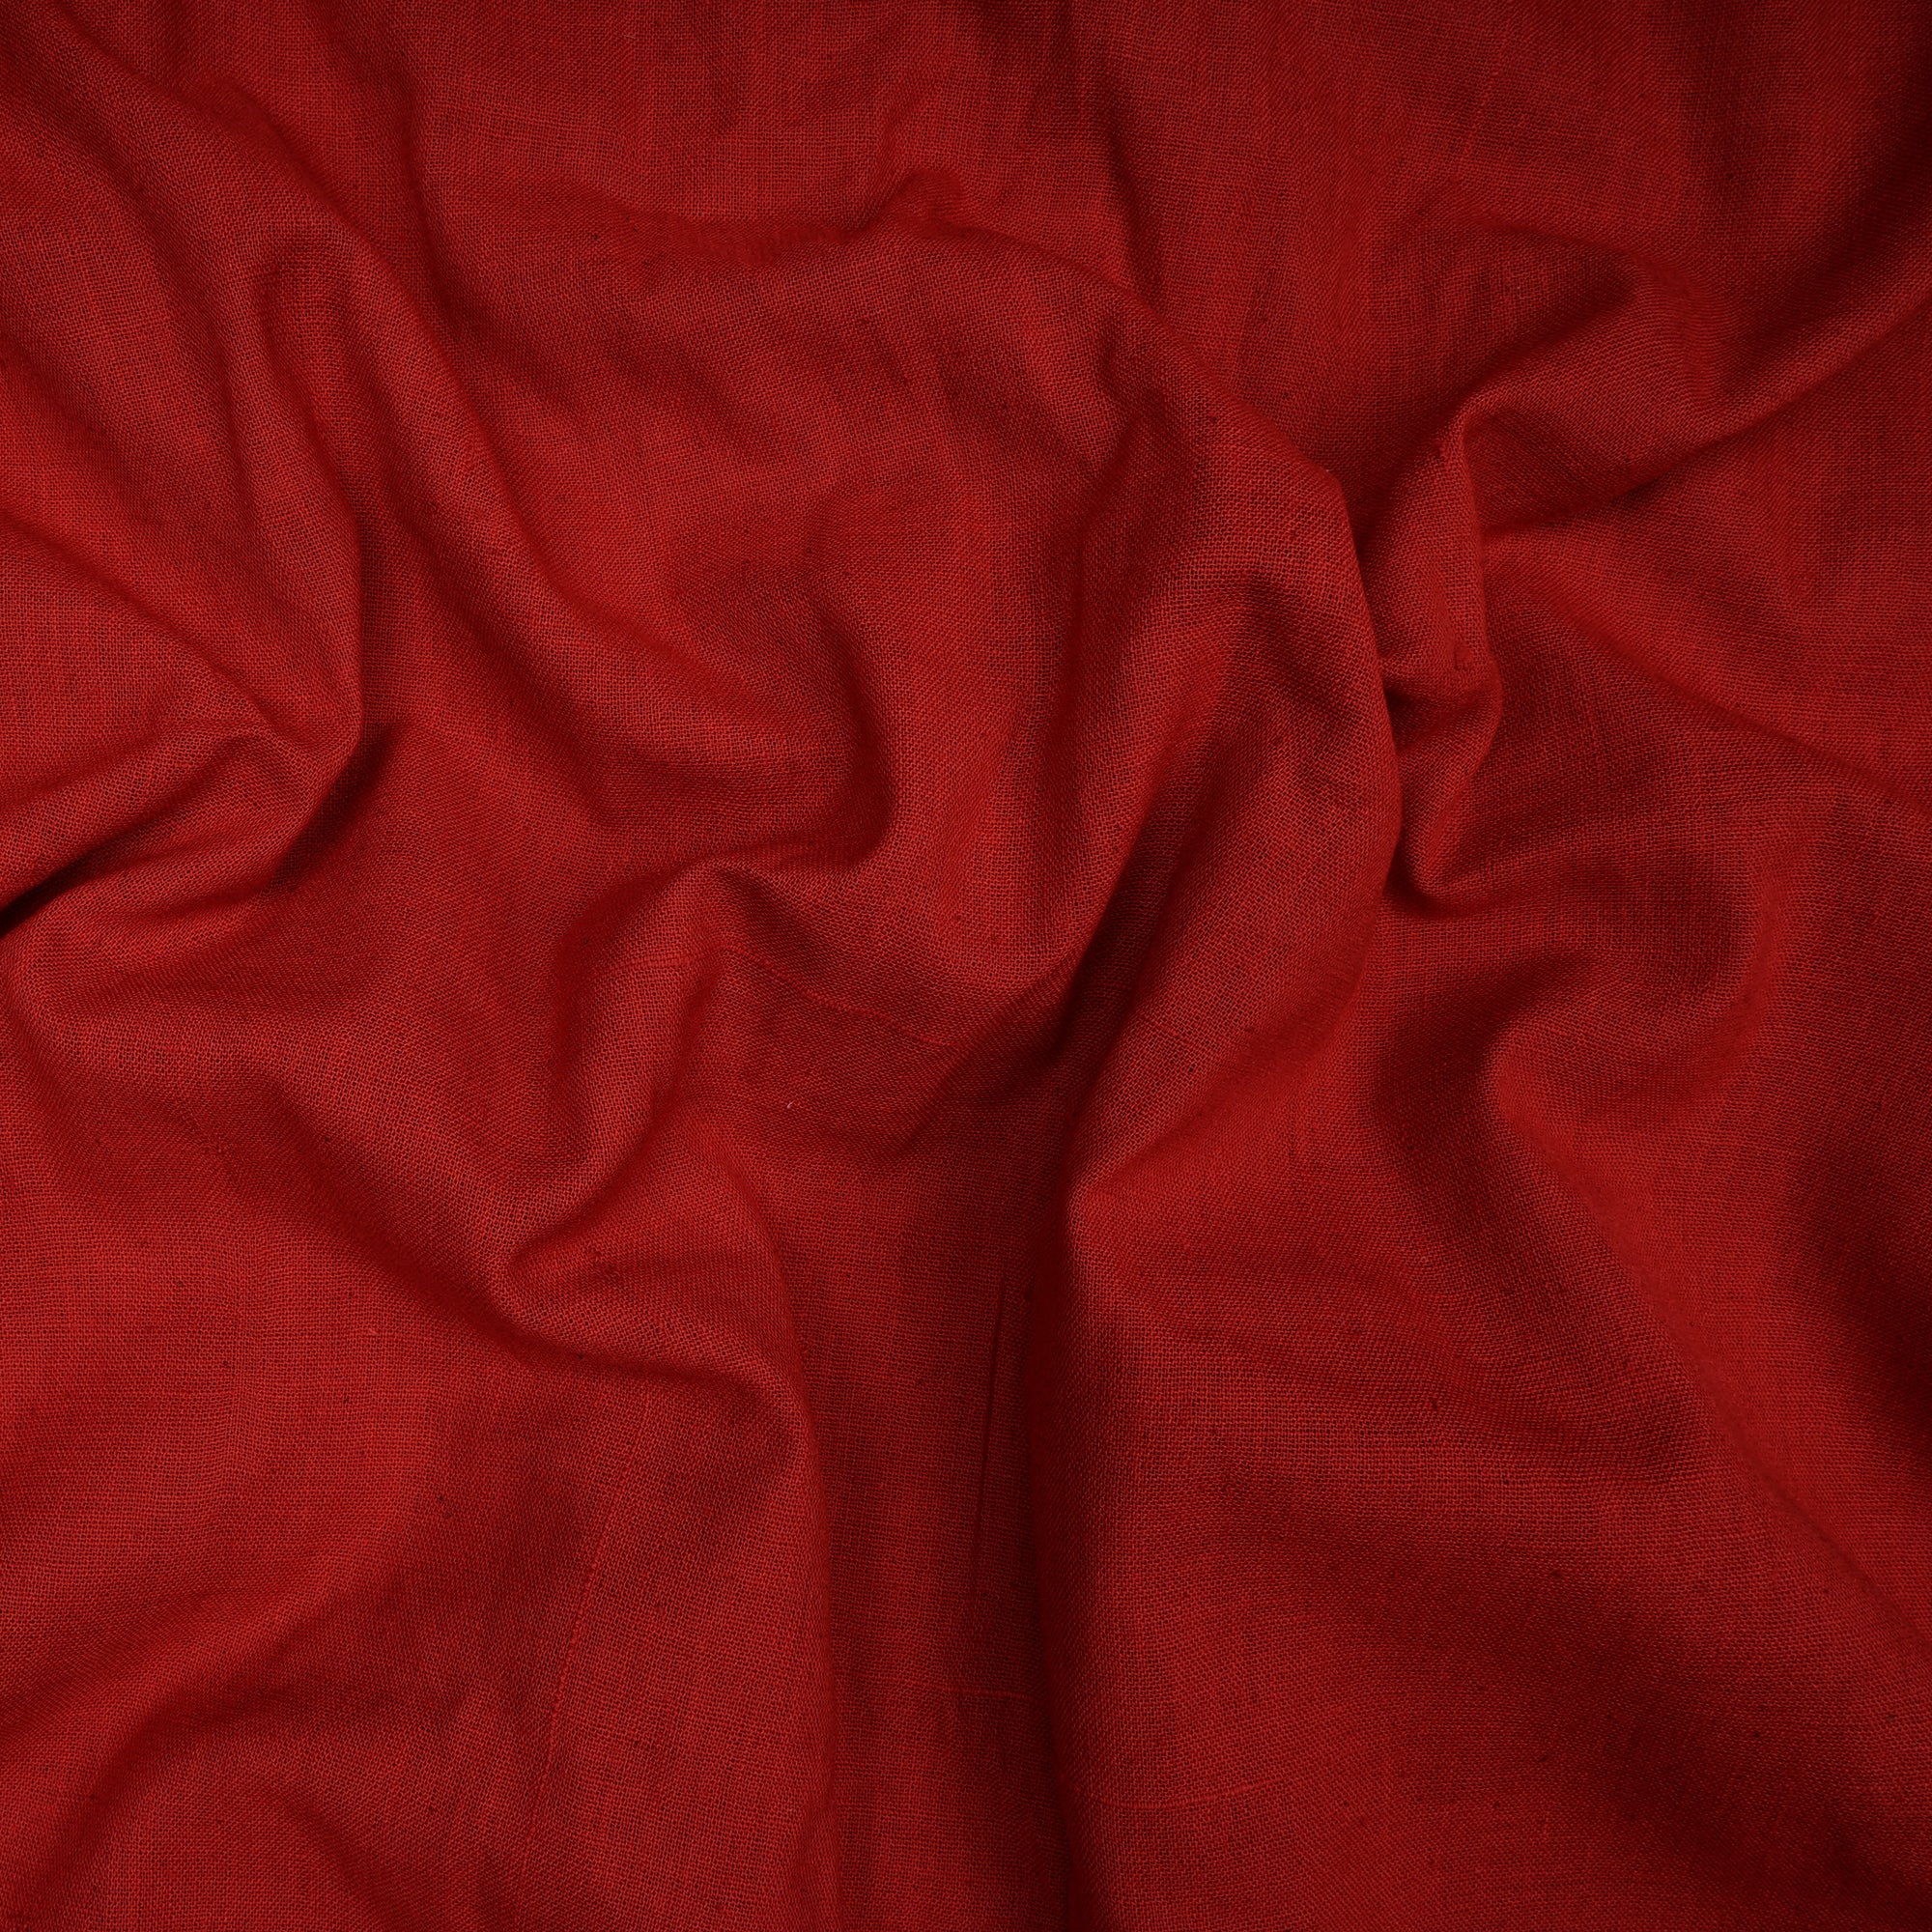 Flame Scarlet 40's Count Piece Dyed Handspun Handwoven Cotton Fabric